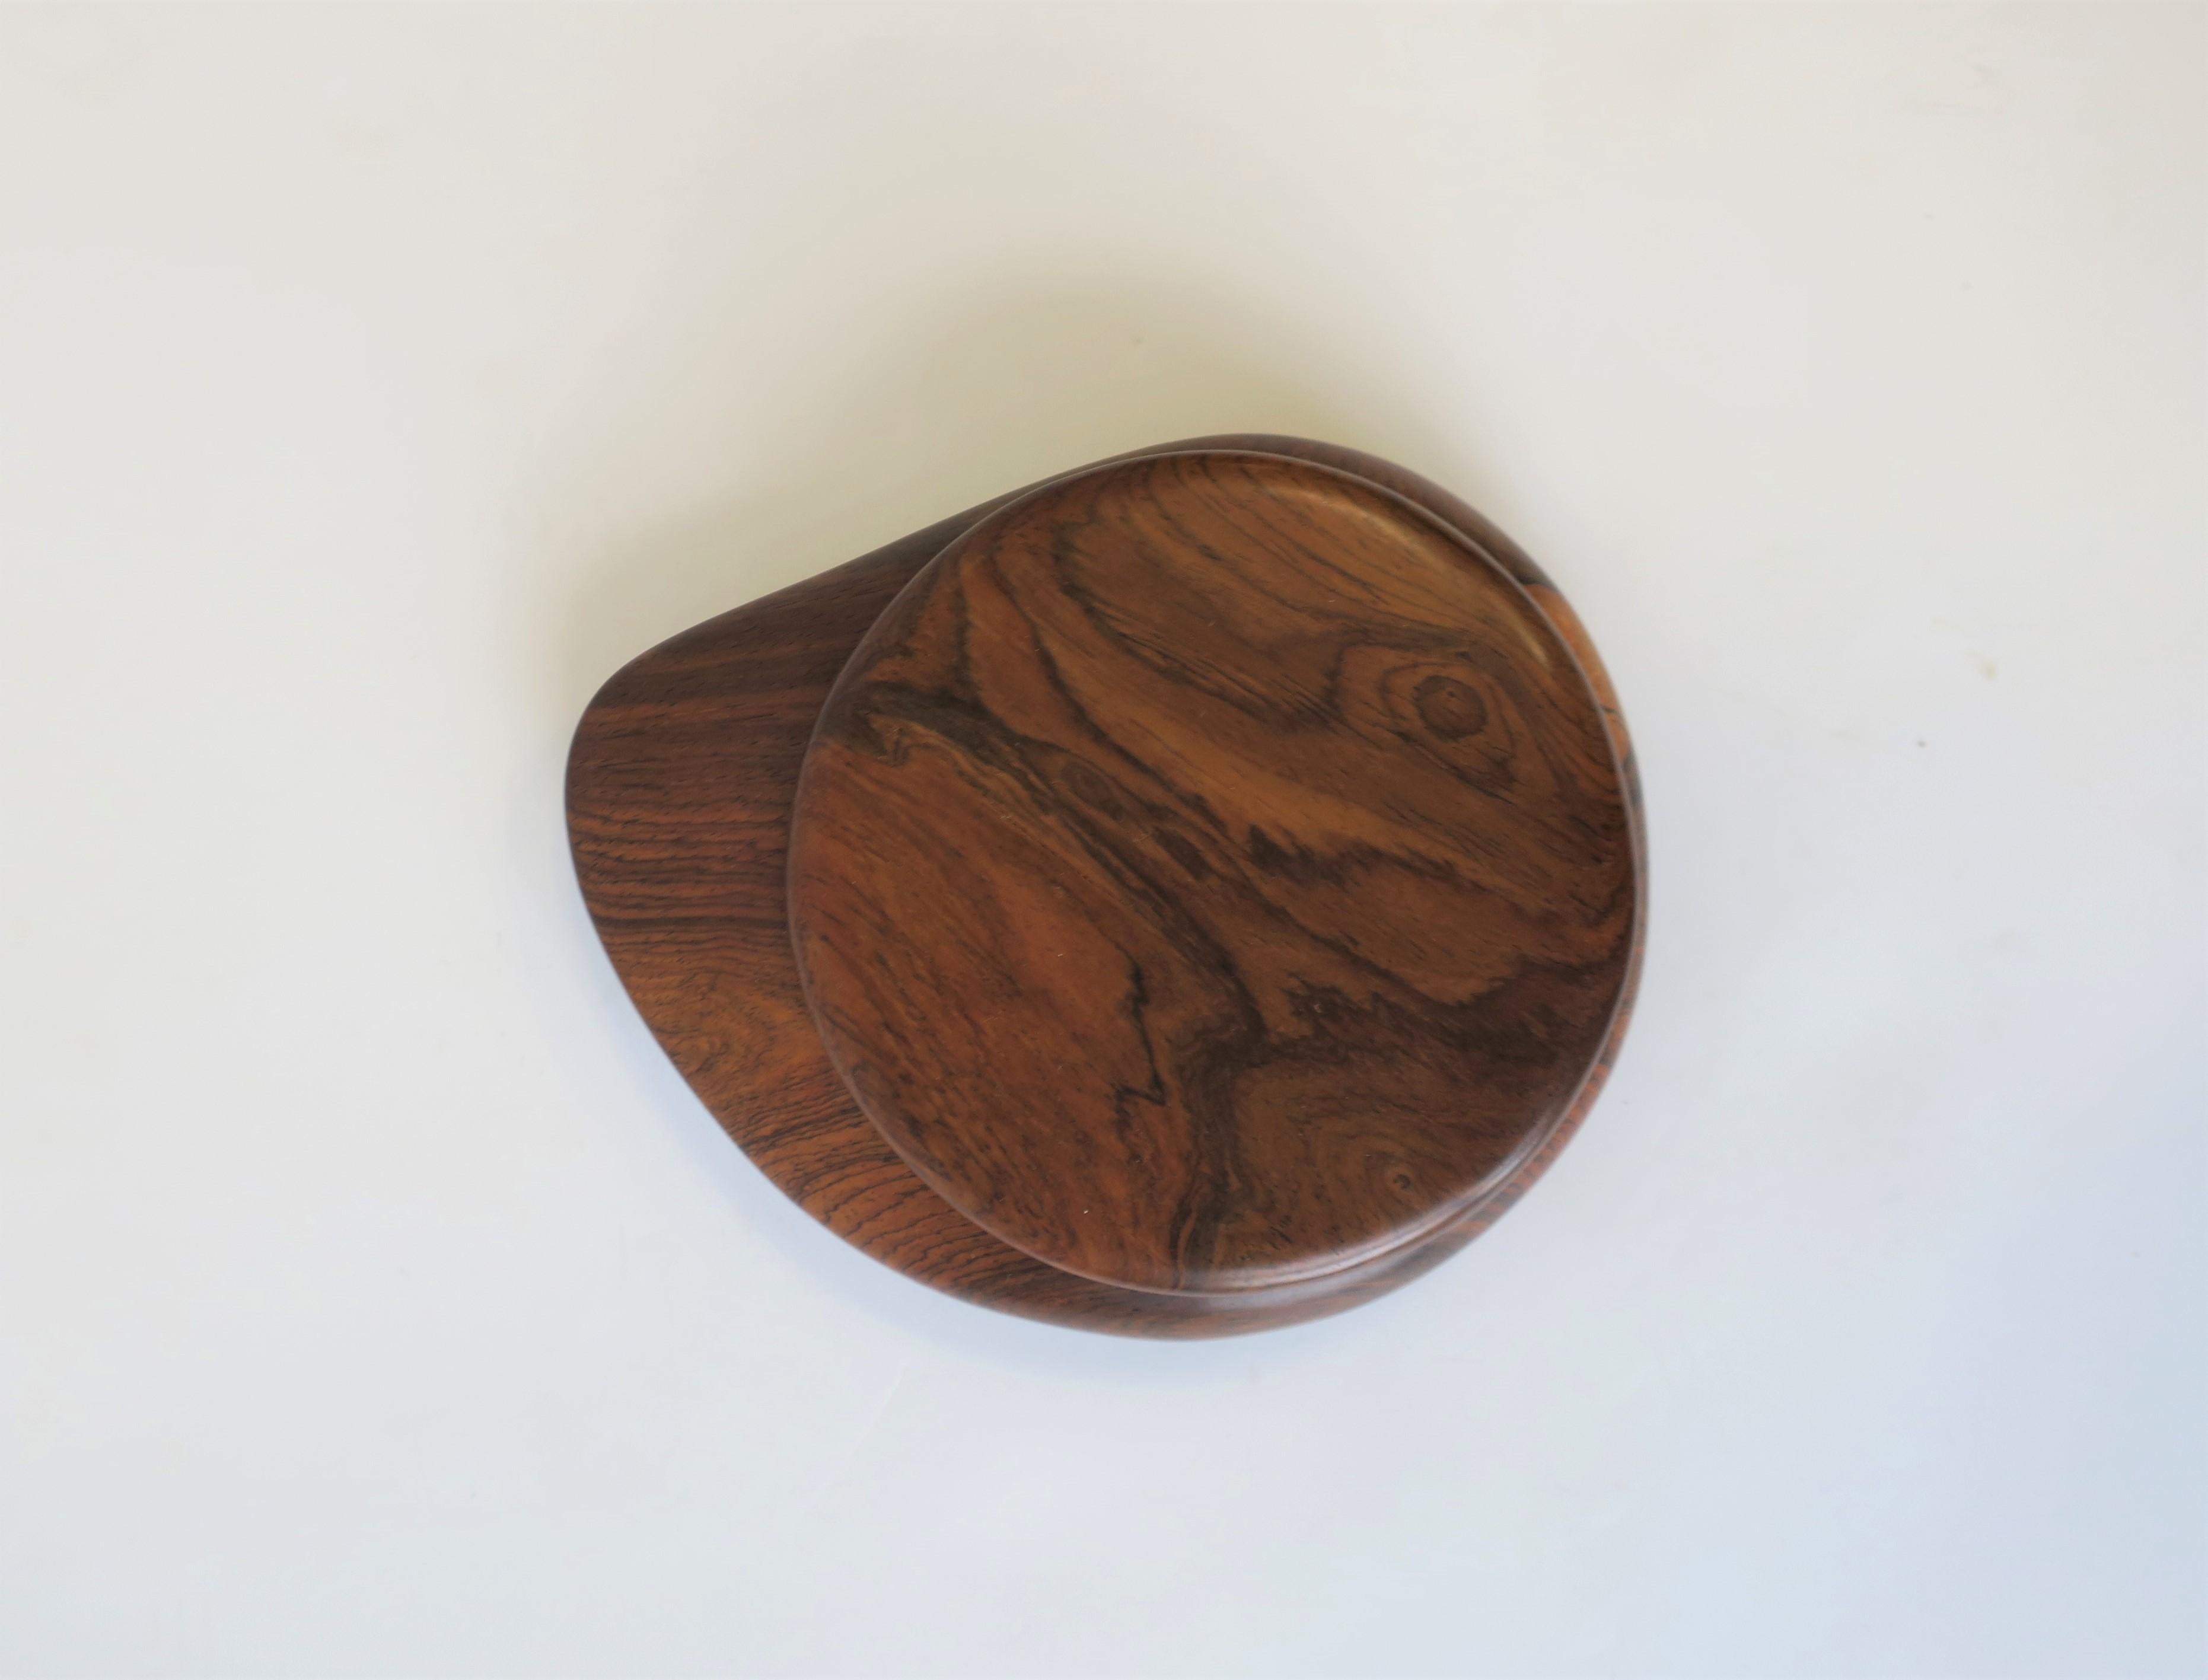 A very beautiful, rich, organic modern or Minimalist style hard wood box. Box can hold jewelry (as demonstrated) or other items for desk, vanity, dresser, etc. 

Piece measures: 5.75